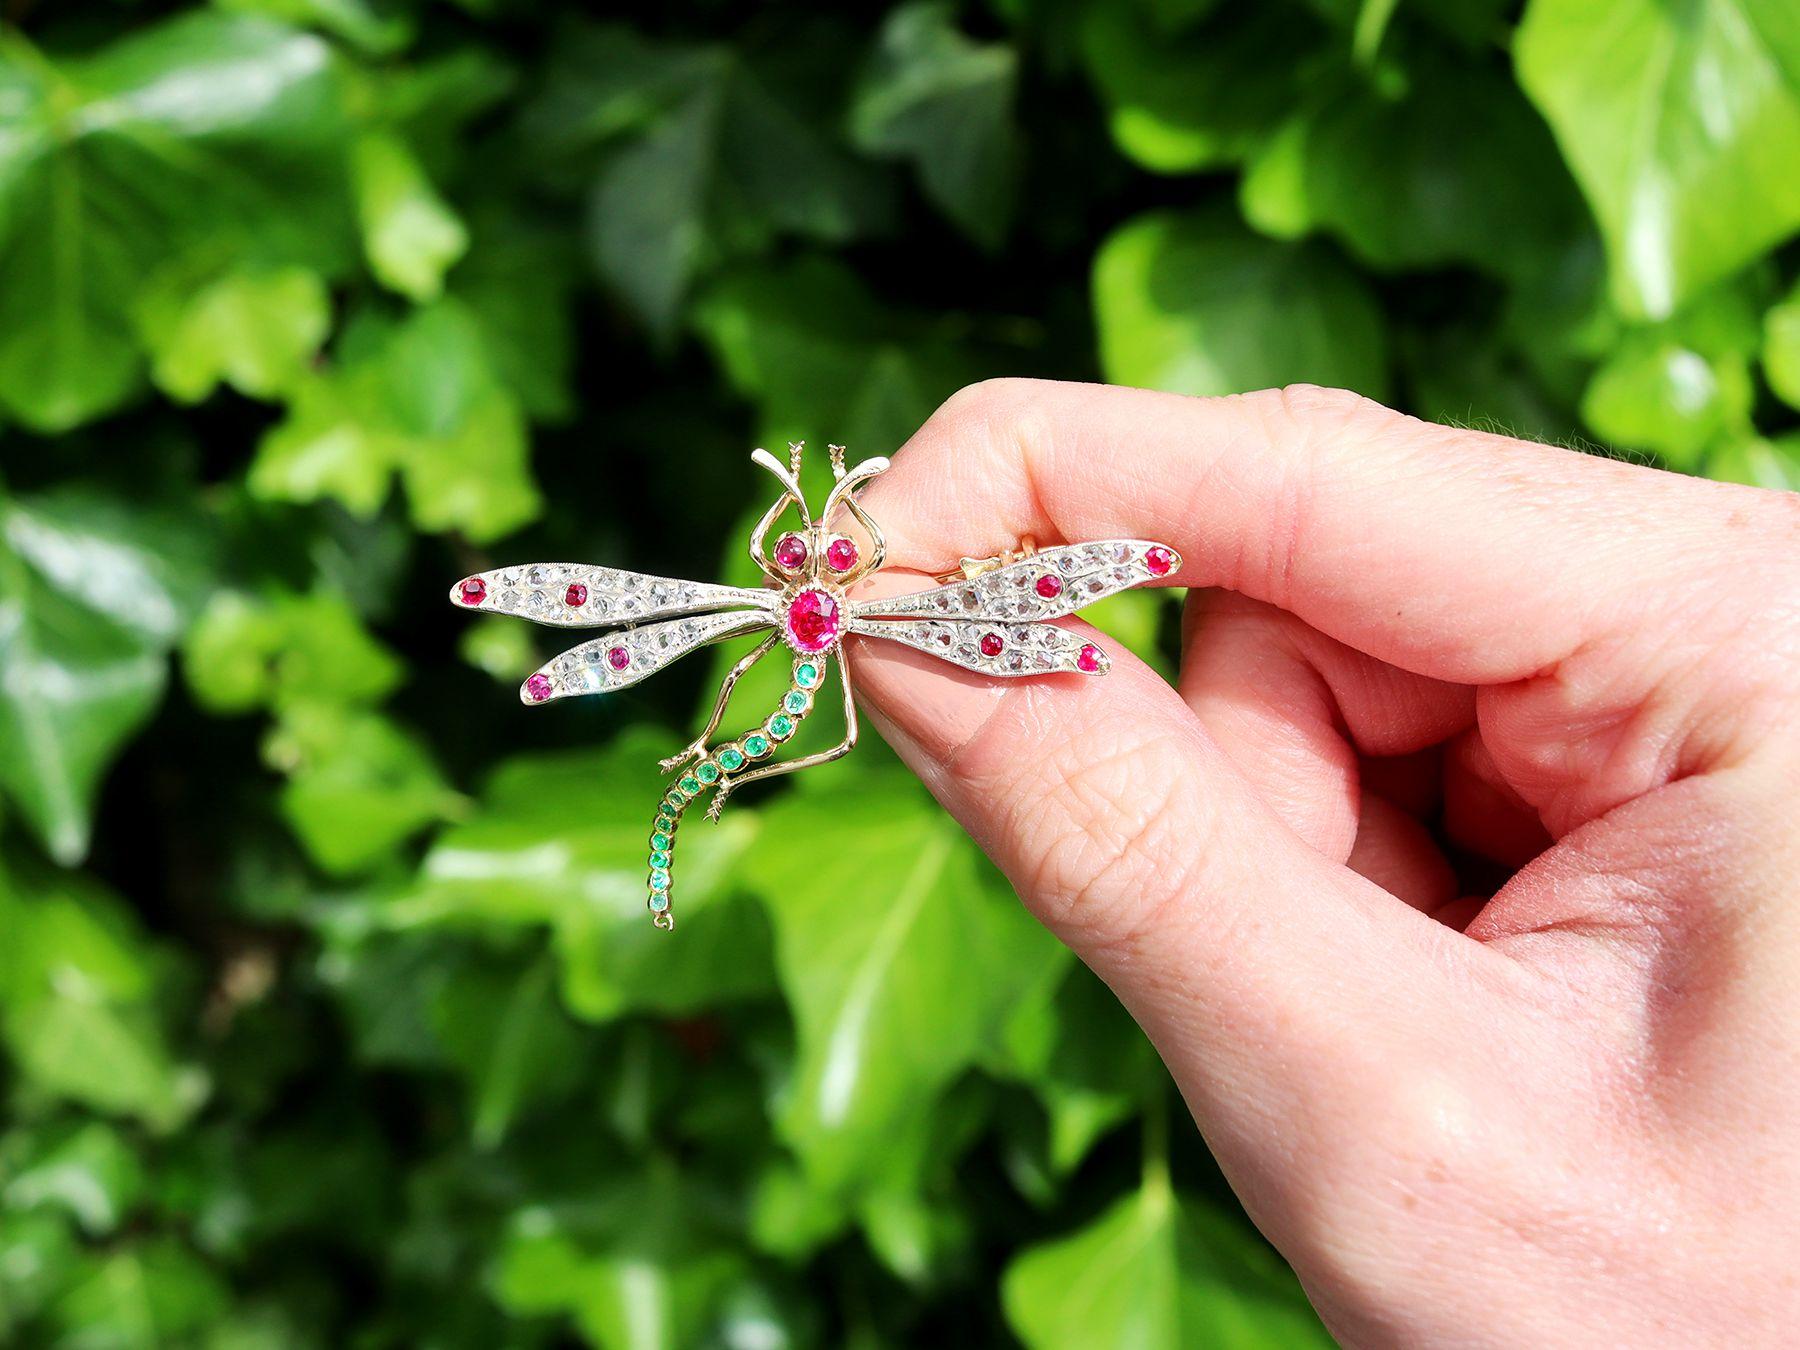 A stunning, fine and impressive antique 0.43 carat ruby, 0.11 carat emerald and 0.42 carat diamond, 18 carat yellow gold and silver set dragonfly brooch; part of our antique jewellery and collections

This stunning, fine and impressive antique